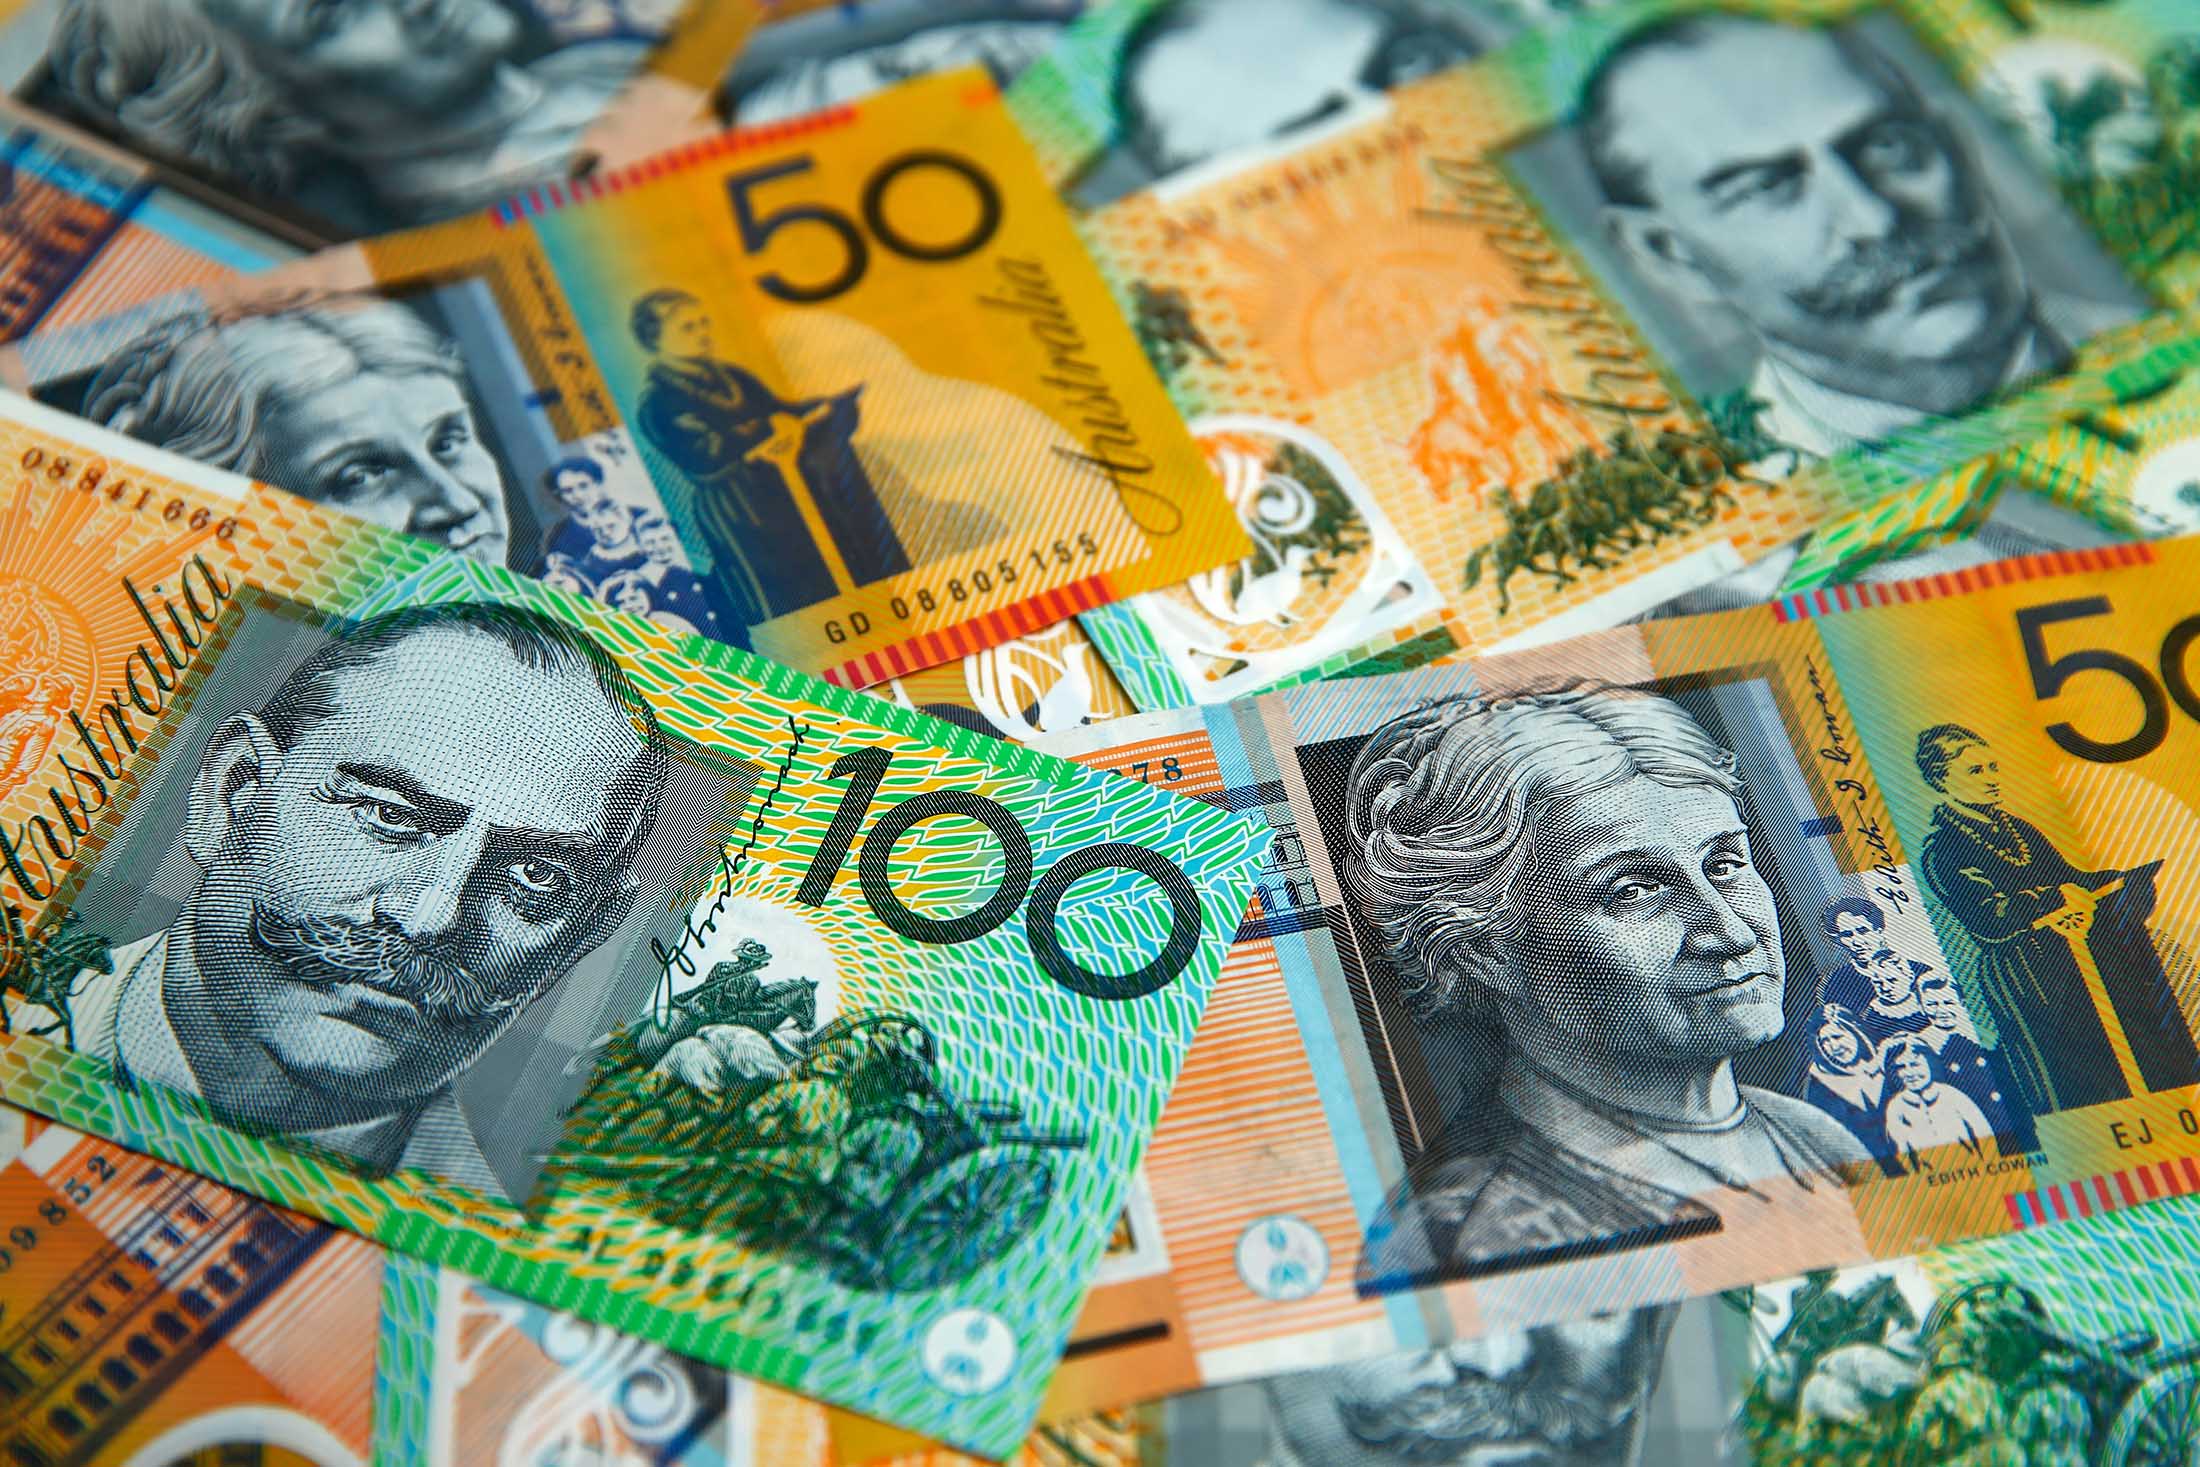 Australian one-hundred dollar and fifty dollar banknotes are arranged for a photograph in Sydney, Australia, on Monday, July 4, 2016. Australia's failure to make a decisive political choice coupled with ongoing Brexit fallout point to the central bank waiting a month to assess the implications before resuming interest-rate cuts.
